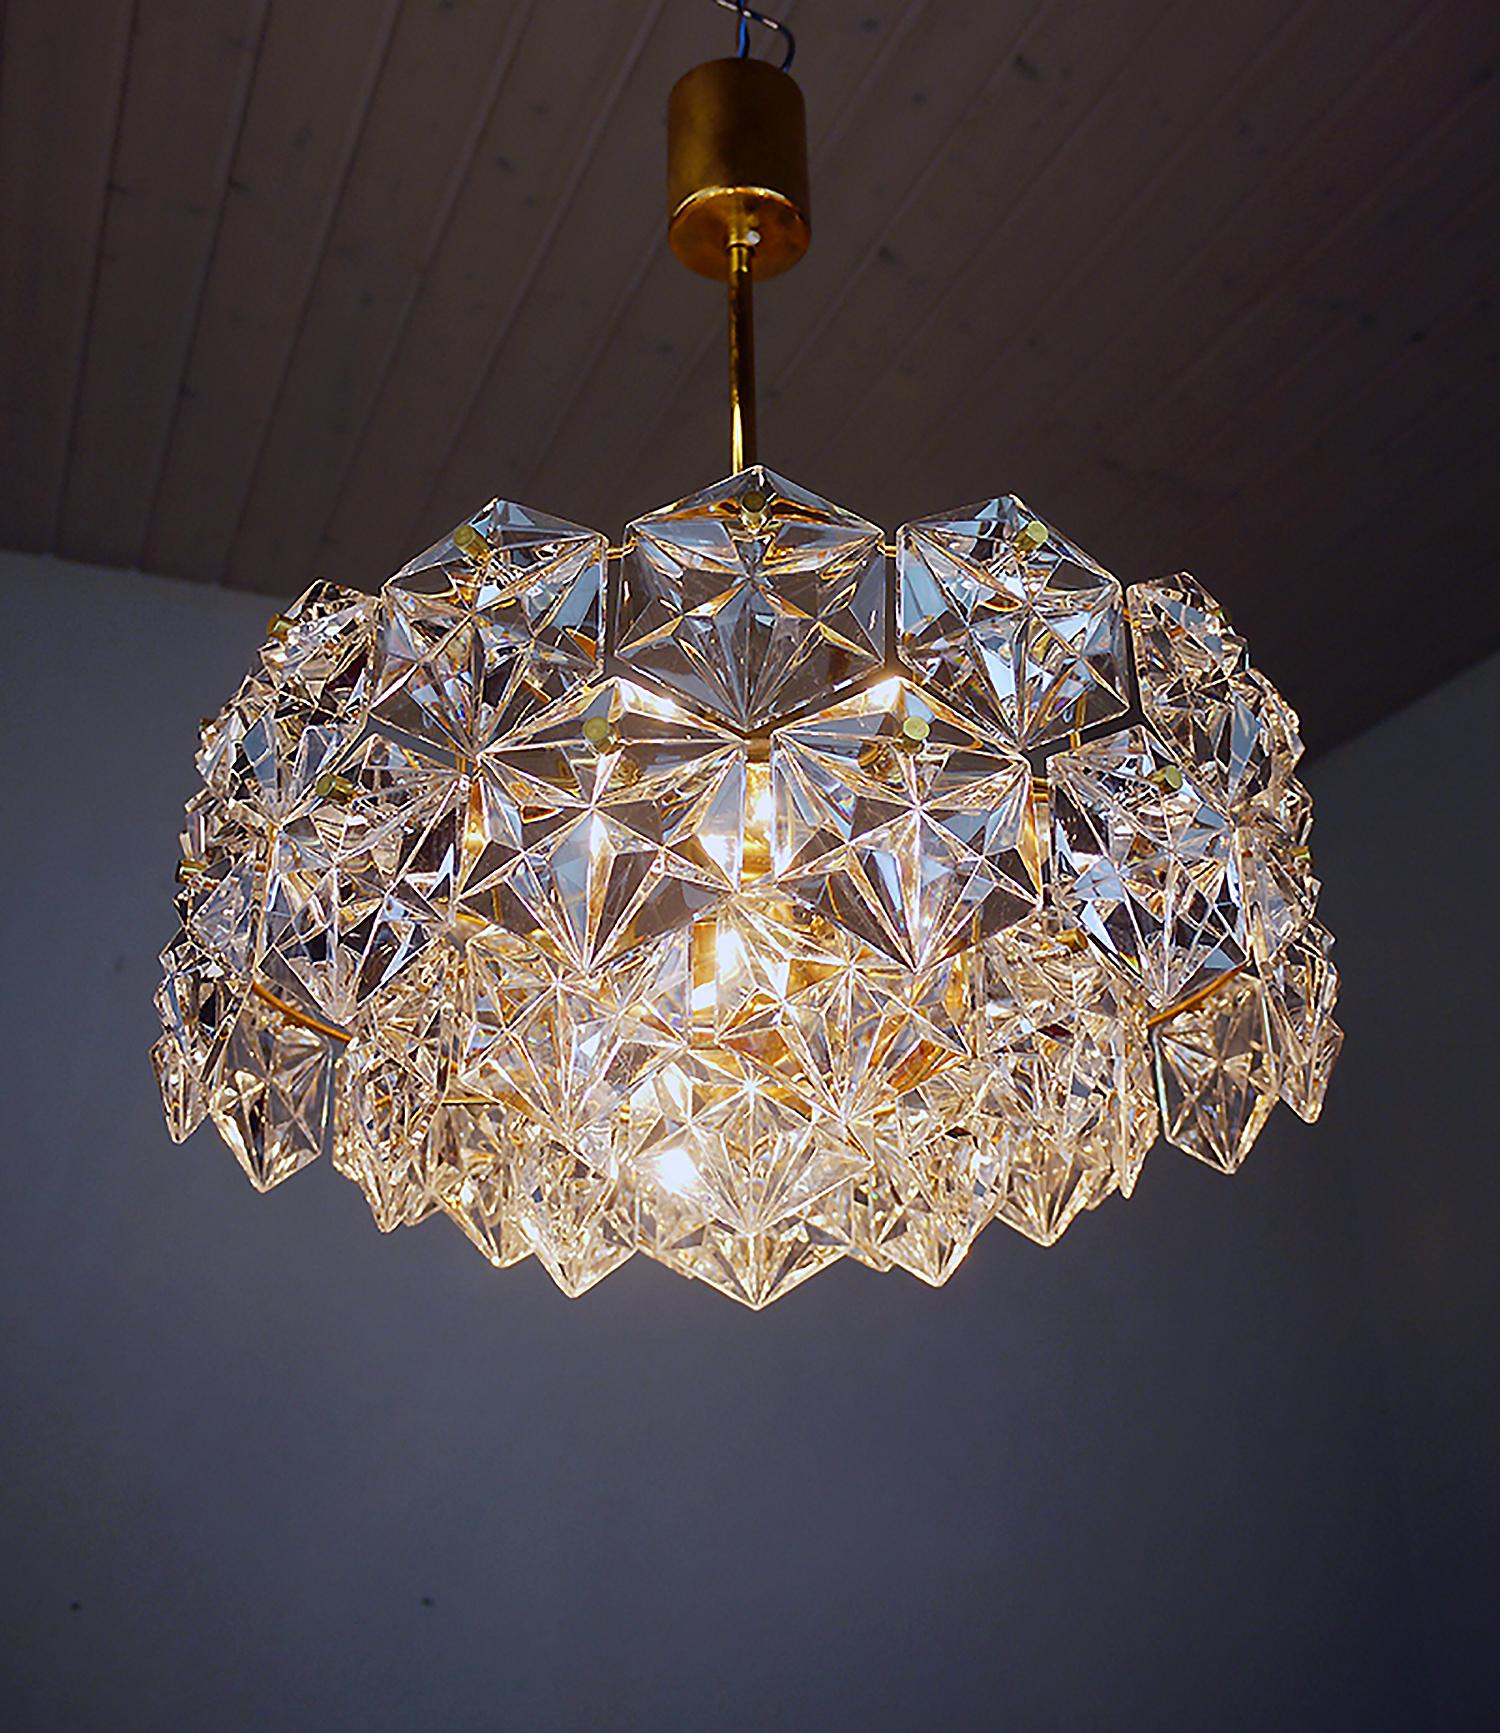 Elegant starburst chandelier with 46 sculptural faceted crystals on a round gold-plated brass frame. Has 7 sockets. In very good condition. Chandelier illuminates beautifully and offers a lot of light. Gem from the time. With this light you make a